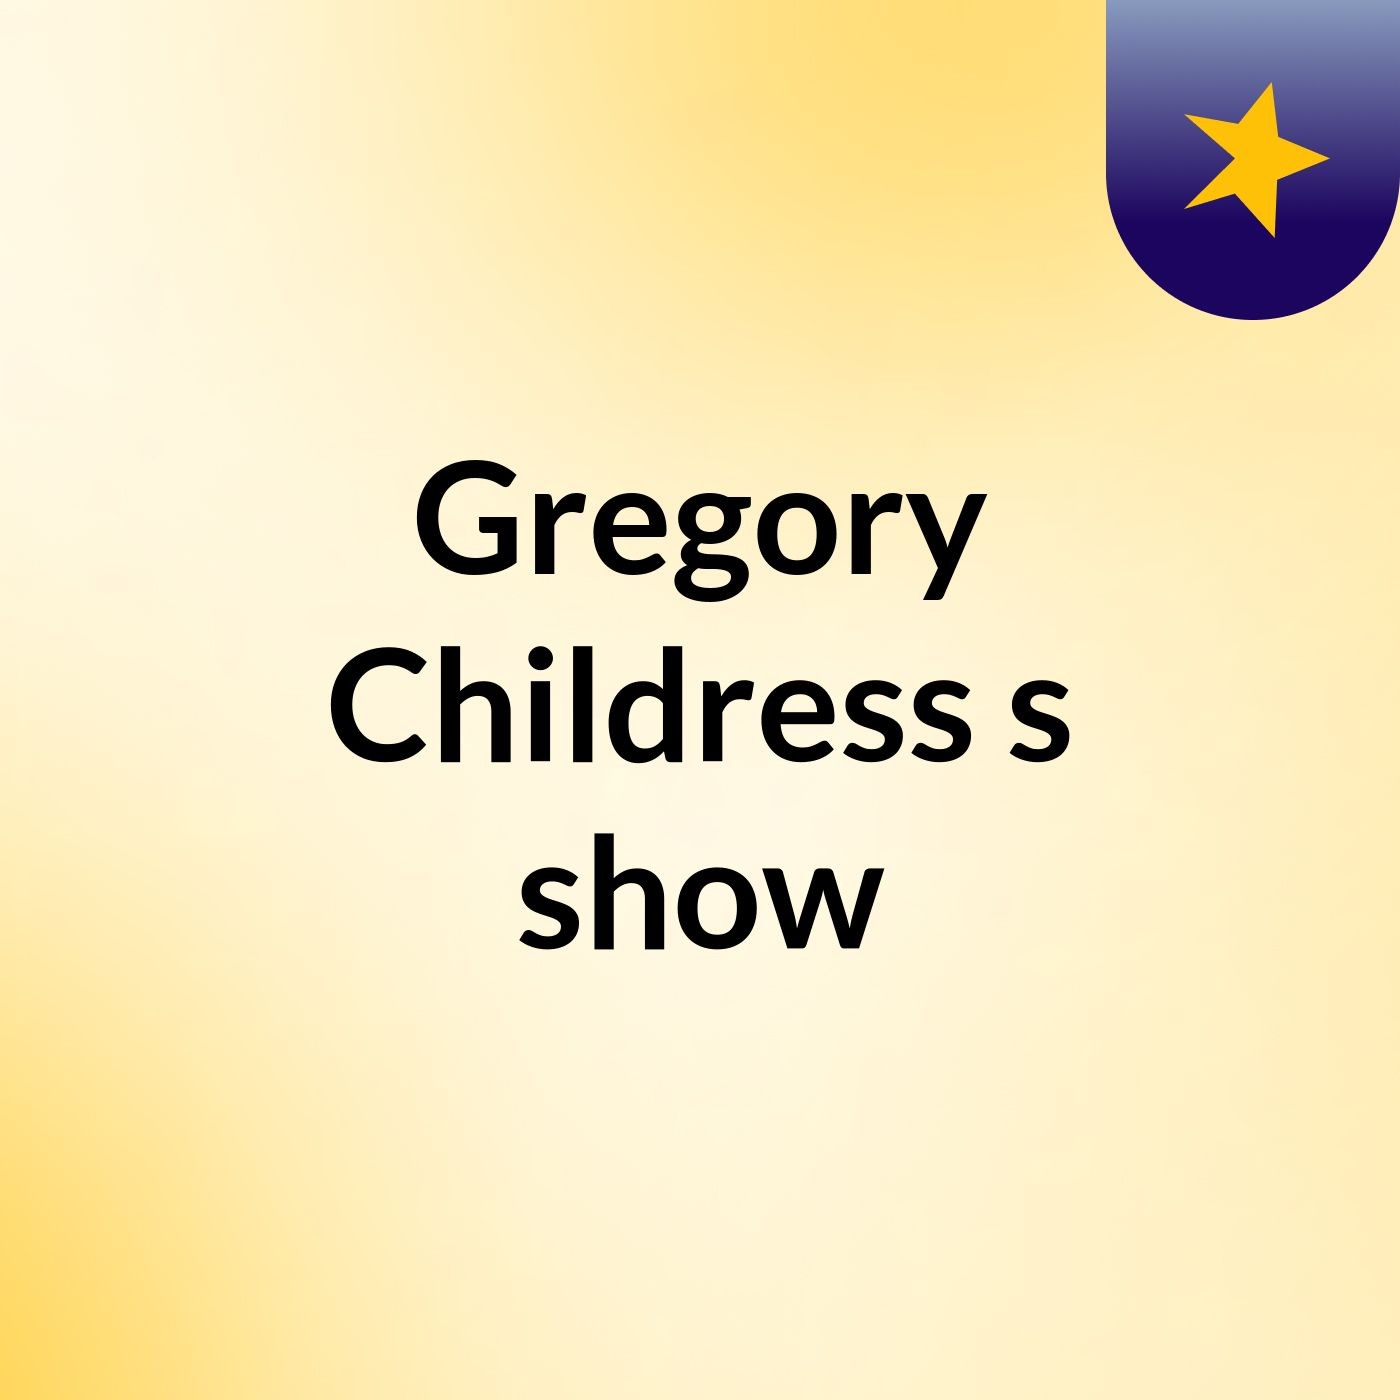 Gregory Childress's show